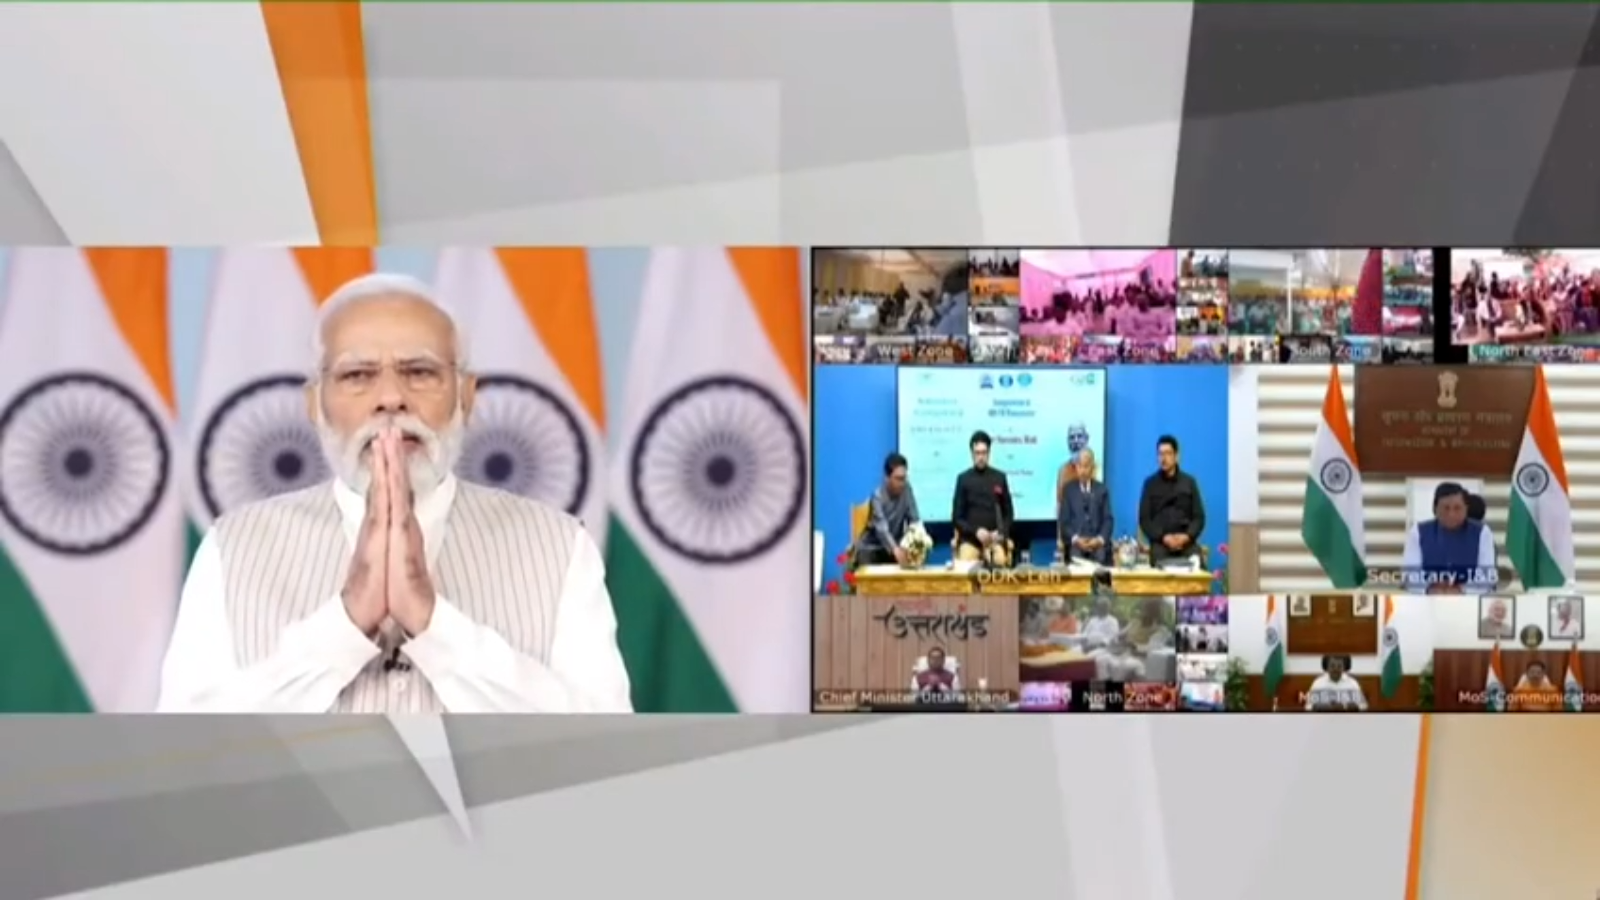 PM Modi inaugurates 91 FM transmitters including 10 in Gujarat covering tribal belt of the state